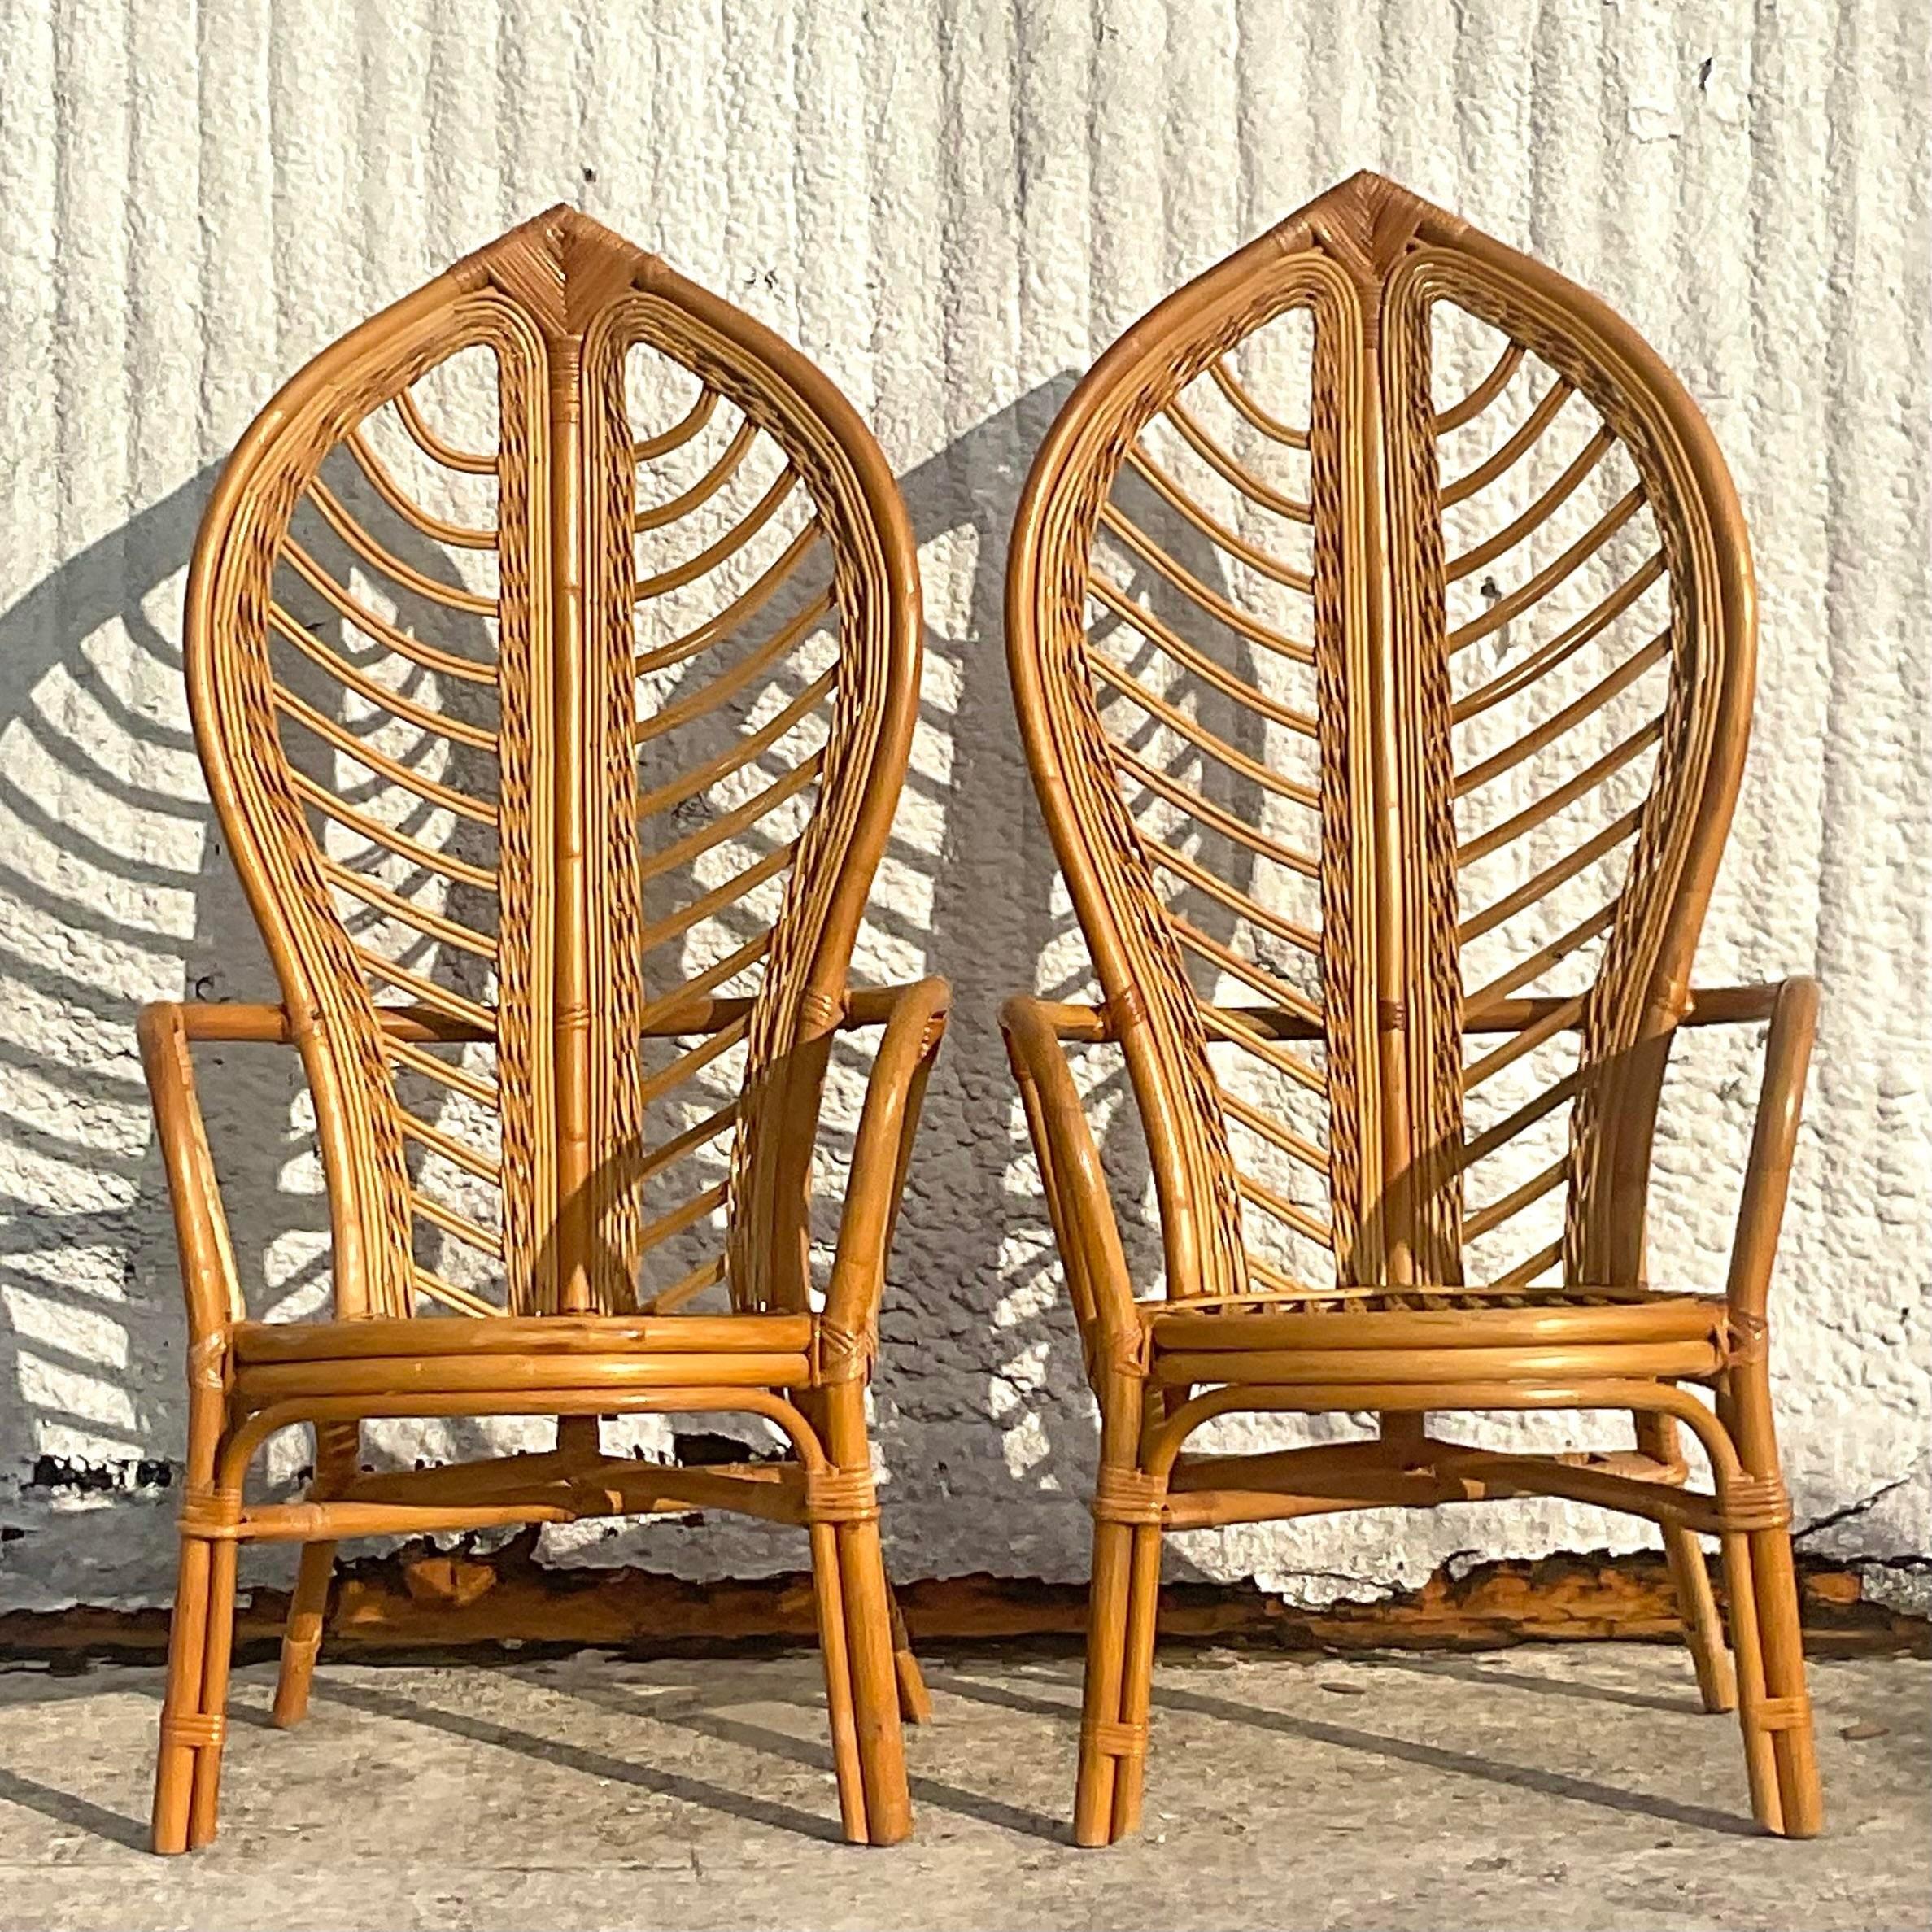 A stunning pair of vintage Coastal lounge chairs. Thr iconic leaf back design in classic bent rattan. Perfect for a flash of drama at the ends of your dining table or either side of your credenza. Acquired from a Palm Beach estate.